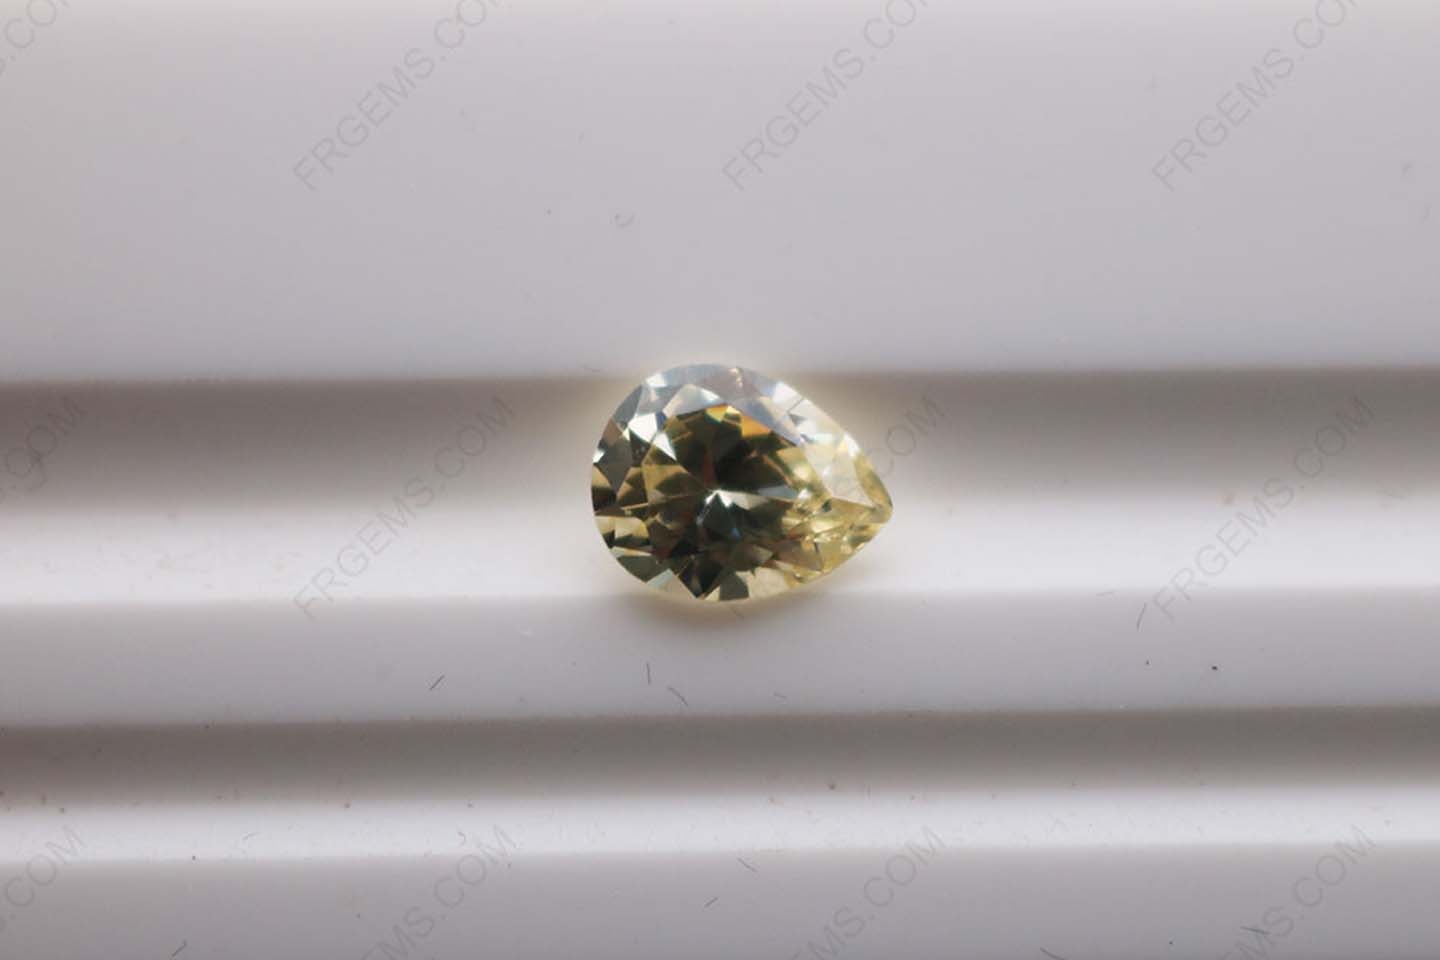 Cubic Zirconia Canary Yellow 3A Pear Shape diamond faceted cut 9x7mm stones CZ06 IMG_3916